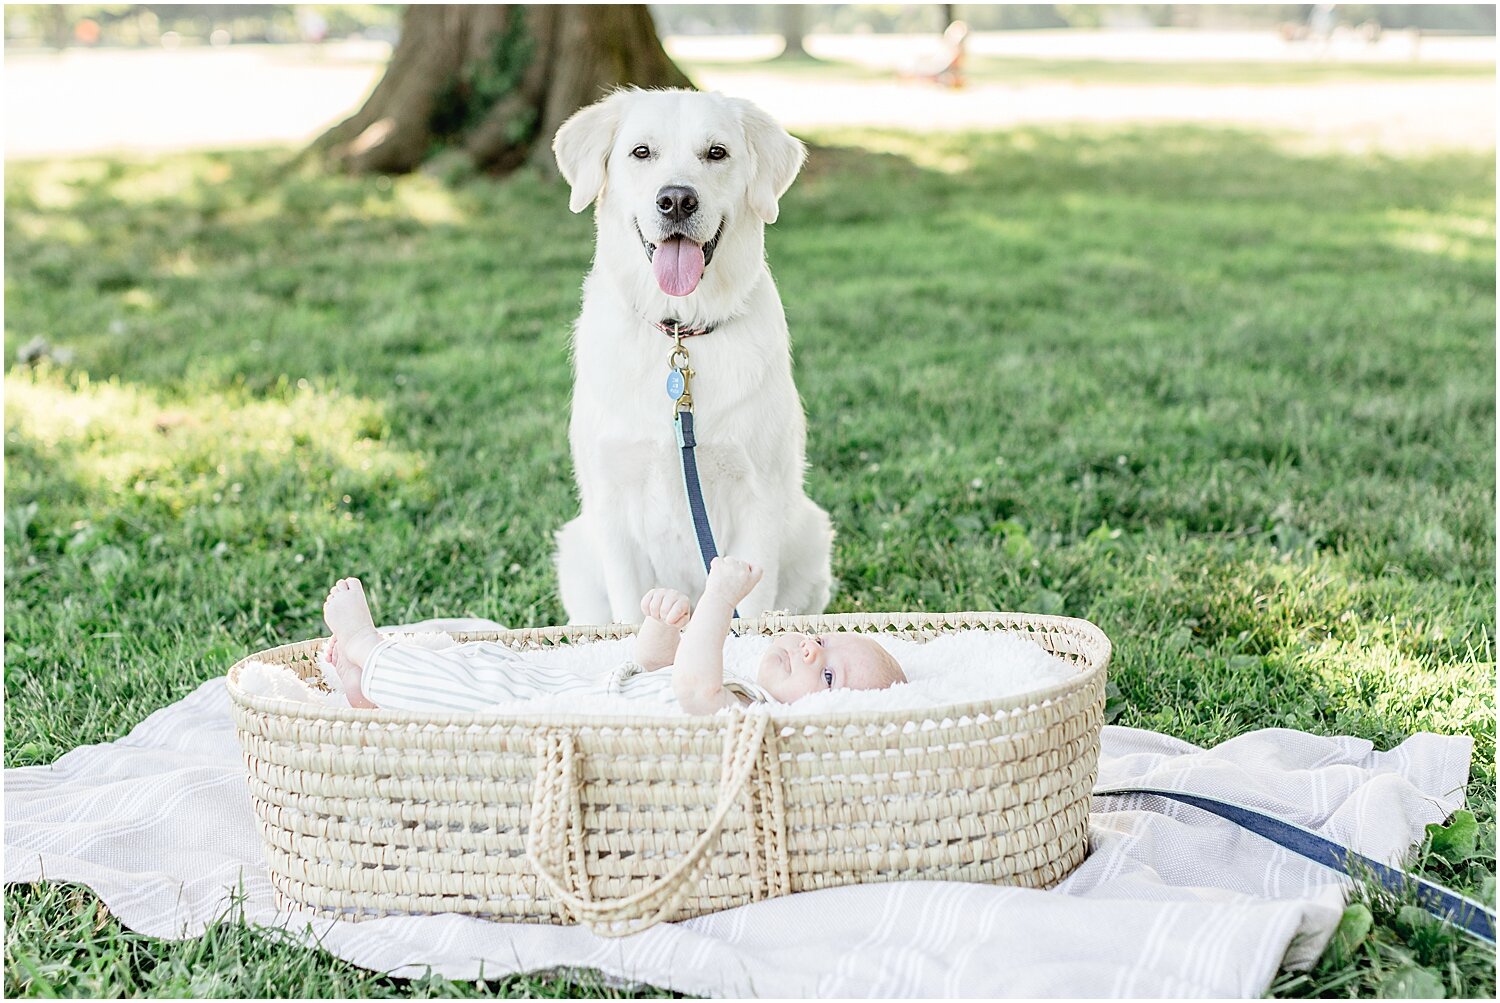 Family dog overlooking baby at outdoor newborn session with Connecticut Baby Photographer, Kristin Wood Photography.